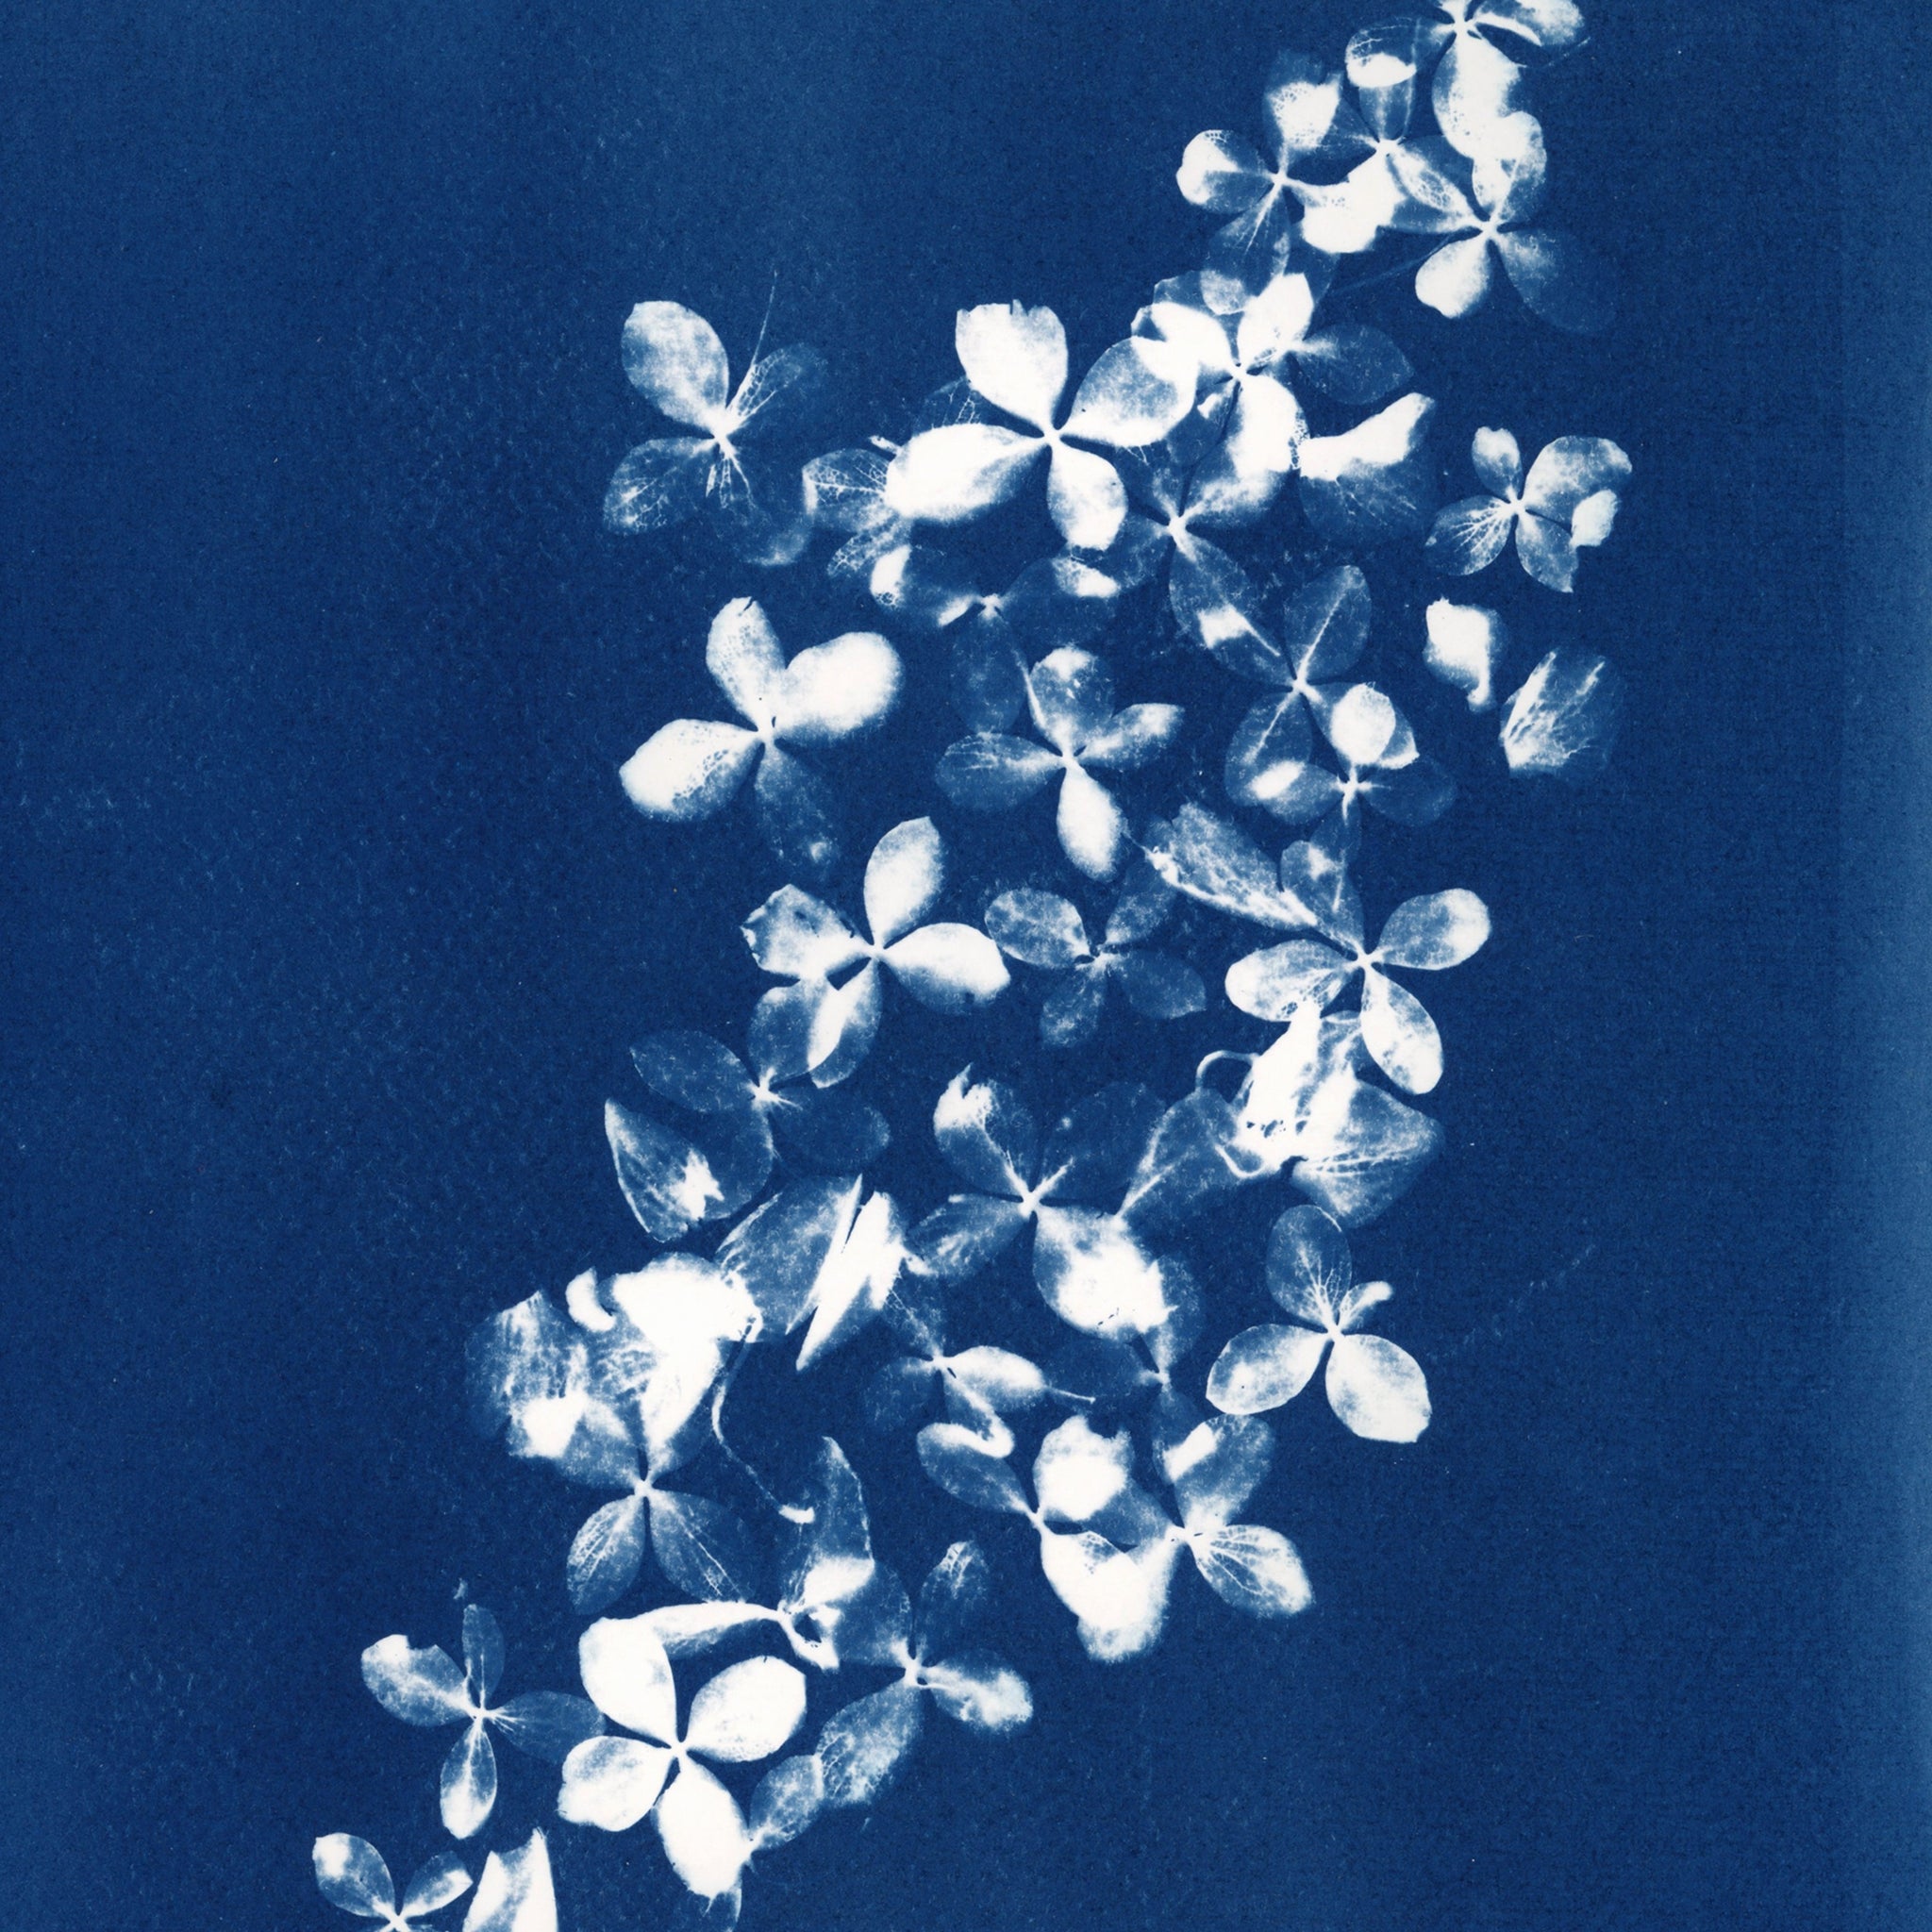 close up of prussian blue cyanotype print made with hydrangea petals